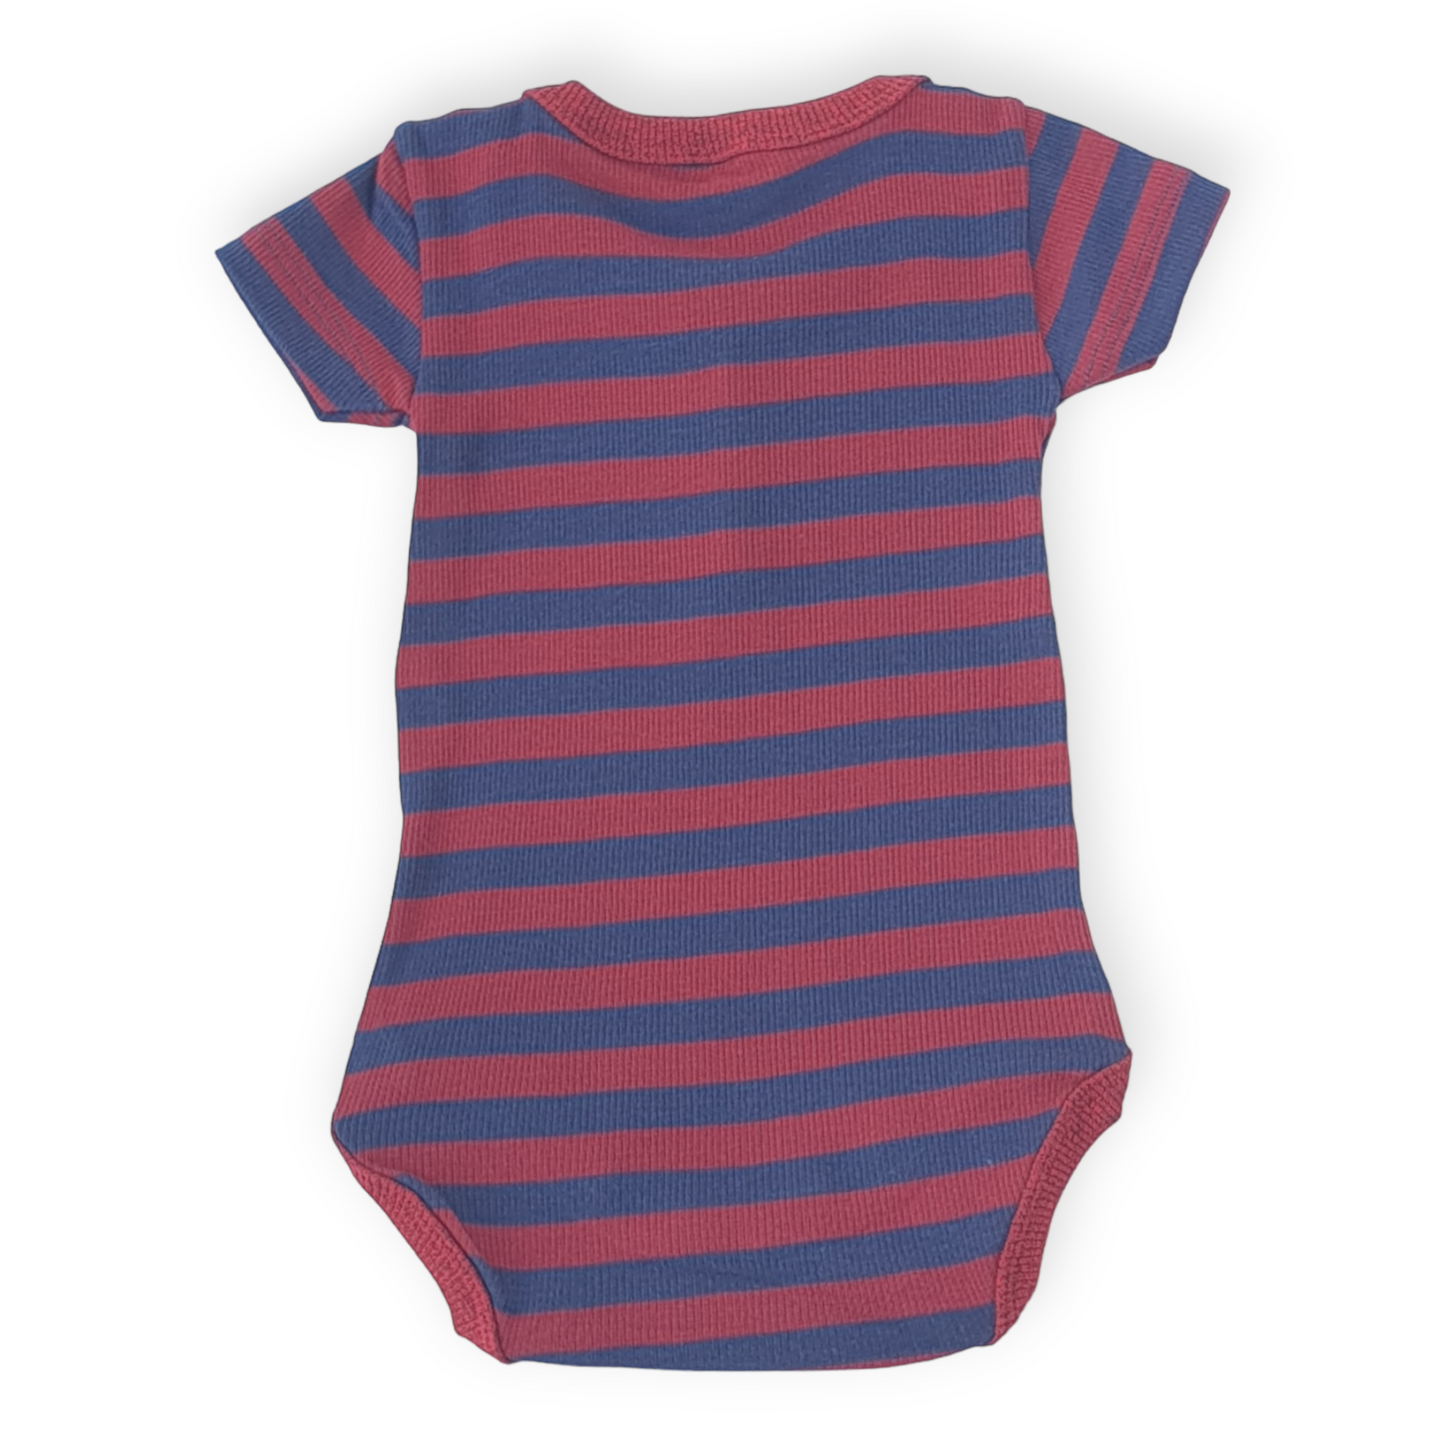 Striped Red and Blue Unisex Body-Blue, Body, Bodysuit, Boy, Catboy, Catgirl, Catunisex, Creeper, Girl, Onesie, Red, Short Sleeve, SS23, Striped-Fuar Baby-[Too Twee]-[Tootwee]-[baby]-[newborn]-[clothes]-[essentials]-[toys]-[Lebanon]